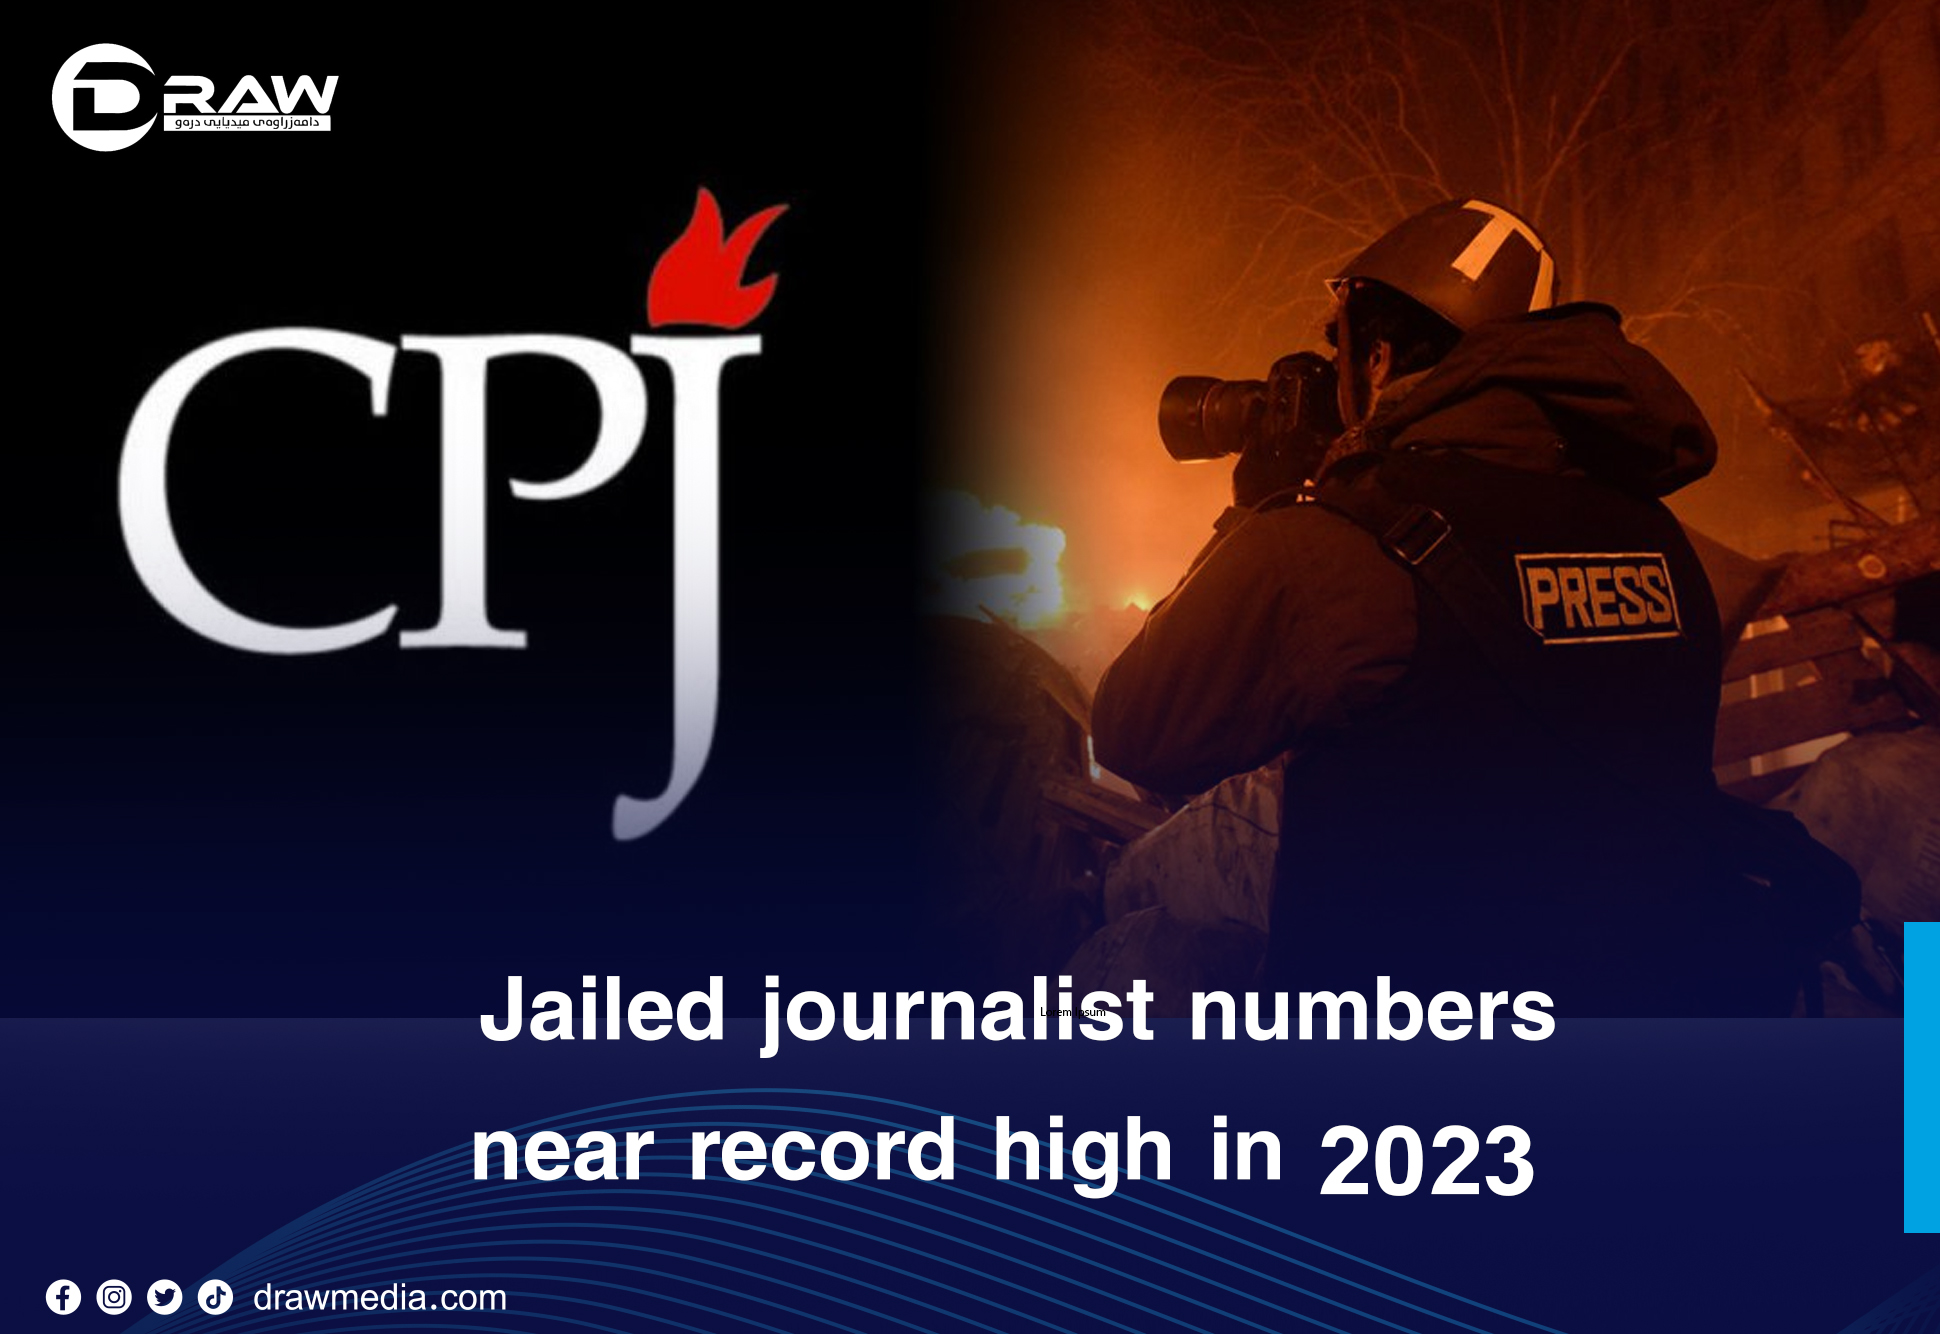 Draw Media- 2023 prison census: Jailed journalist numbers near record high